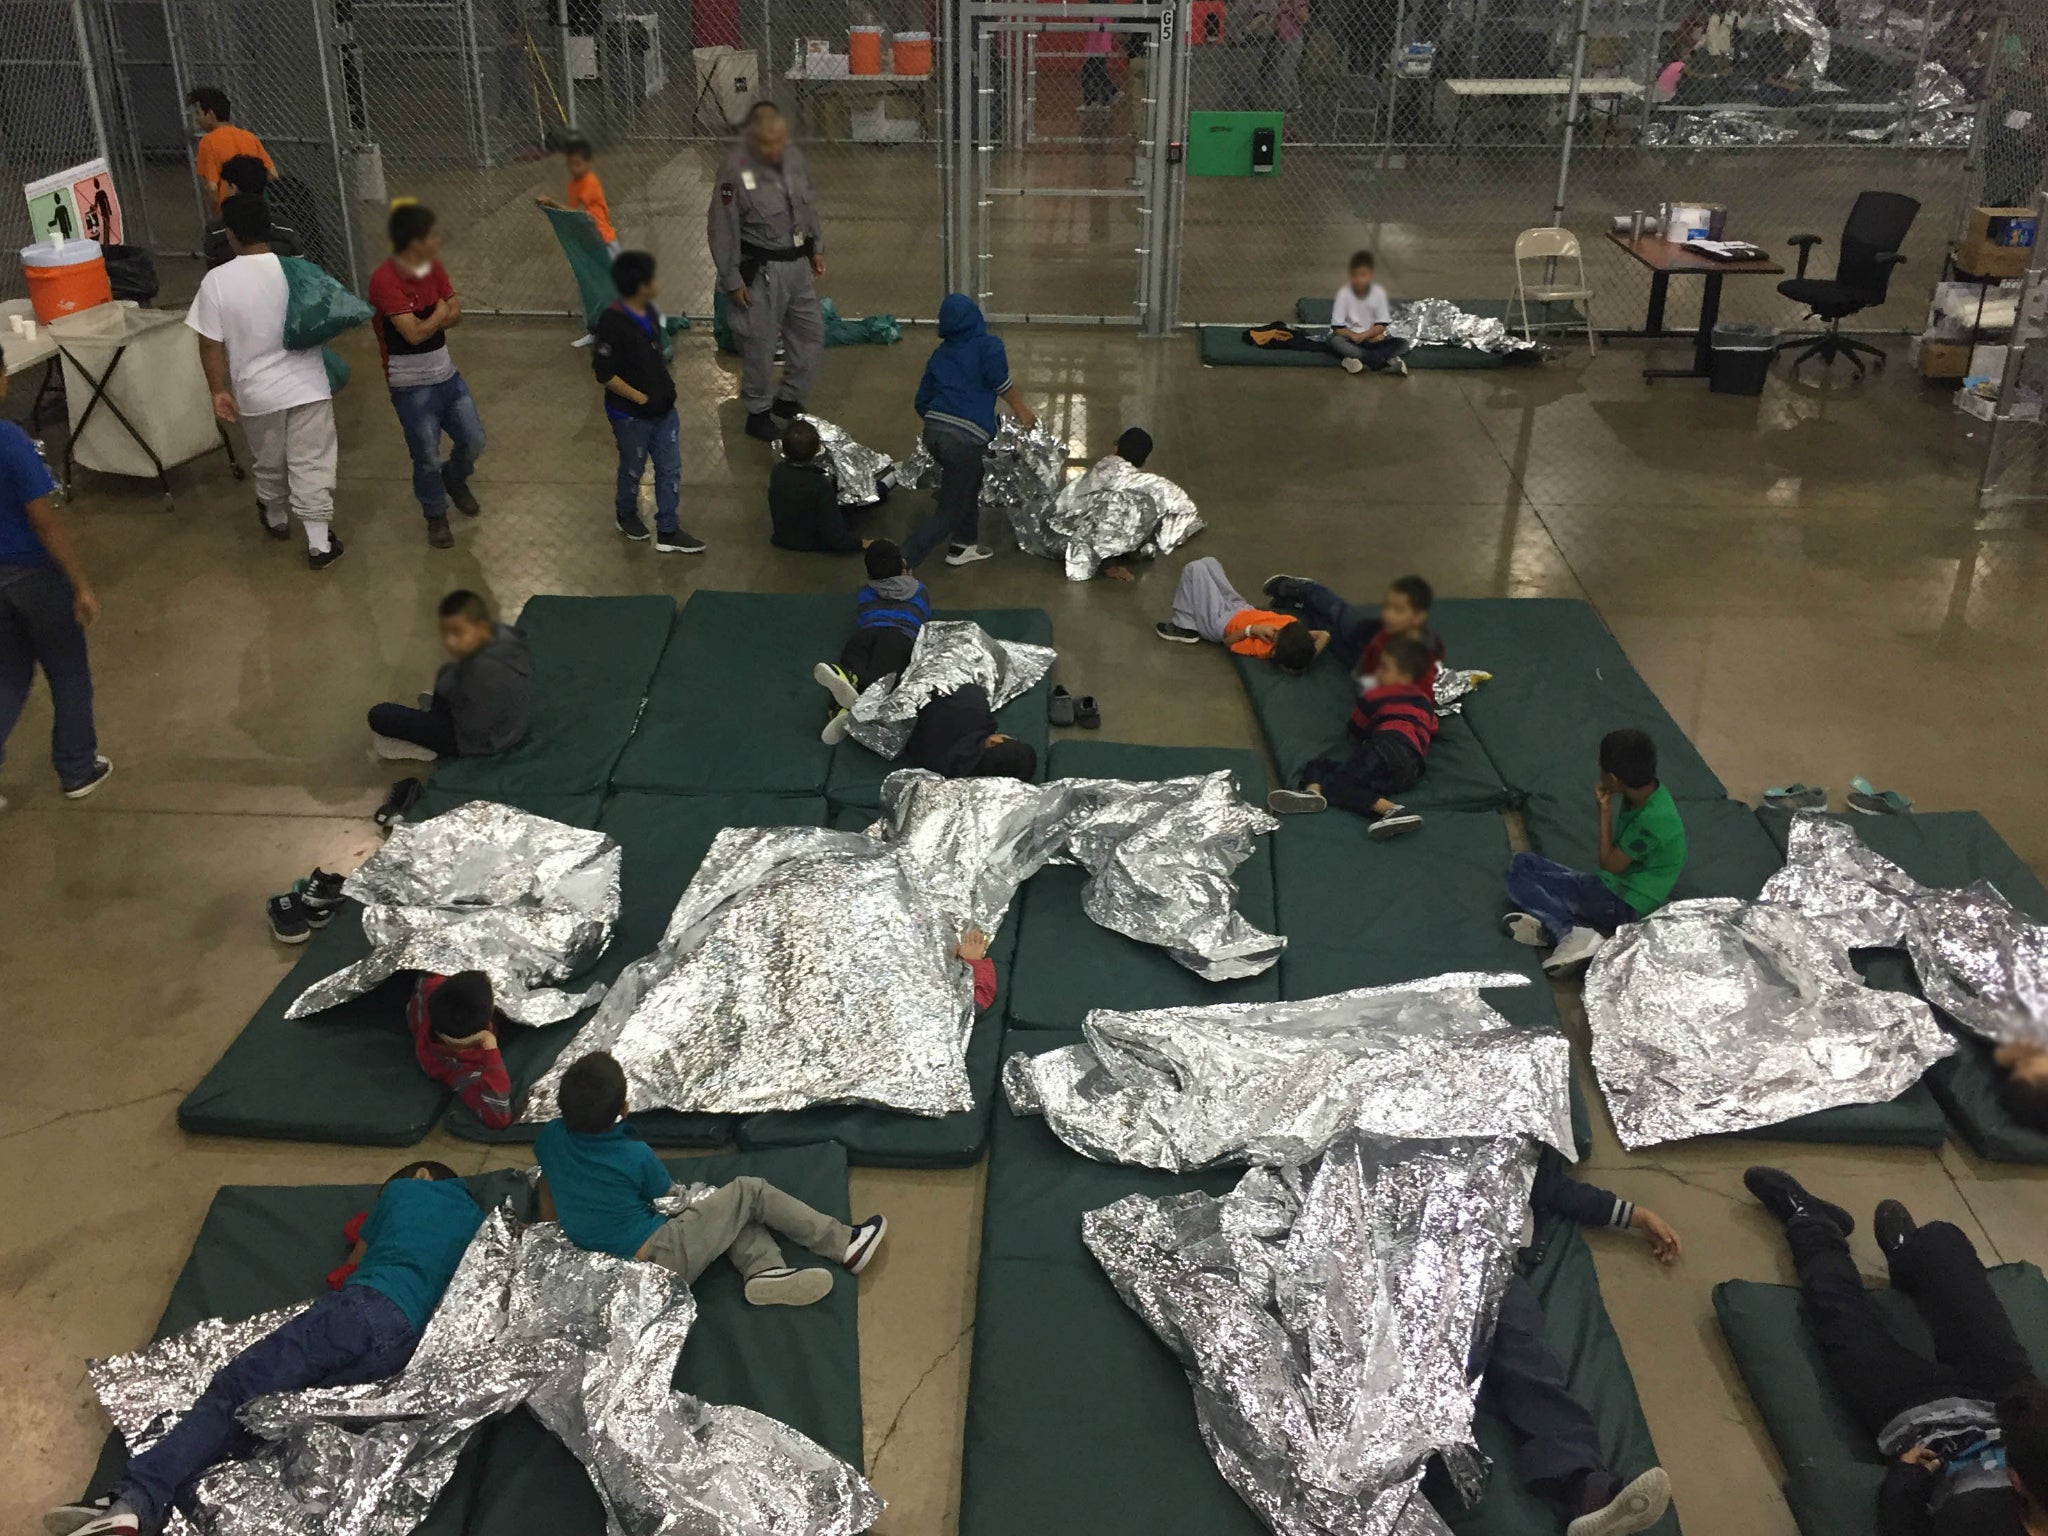 A view inside a Customs and Border Protection (CBP) detention facility in Rio Grande City, Texas